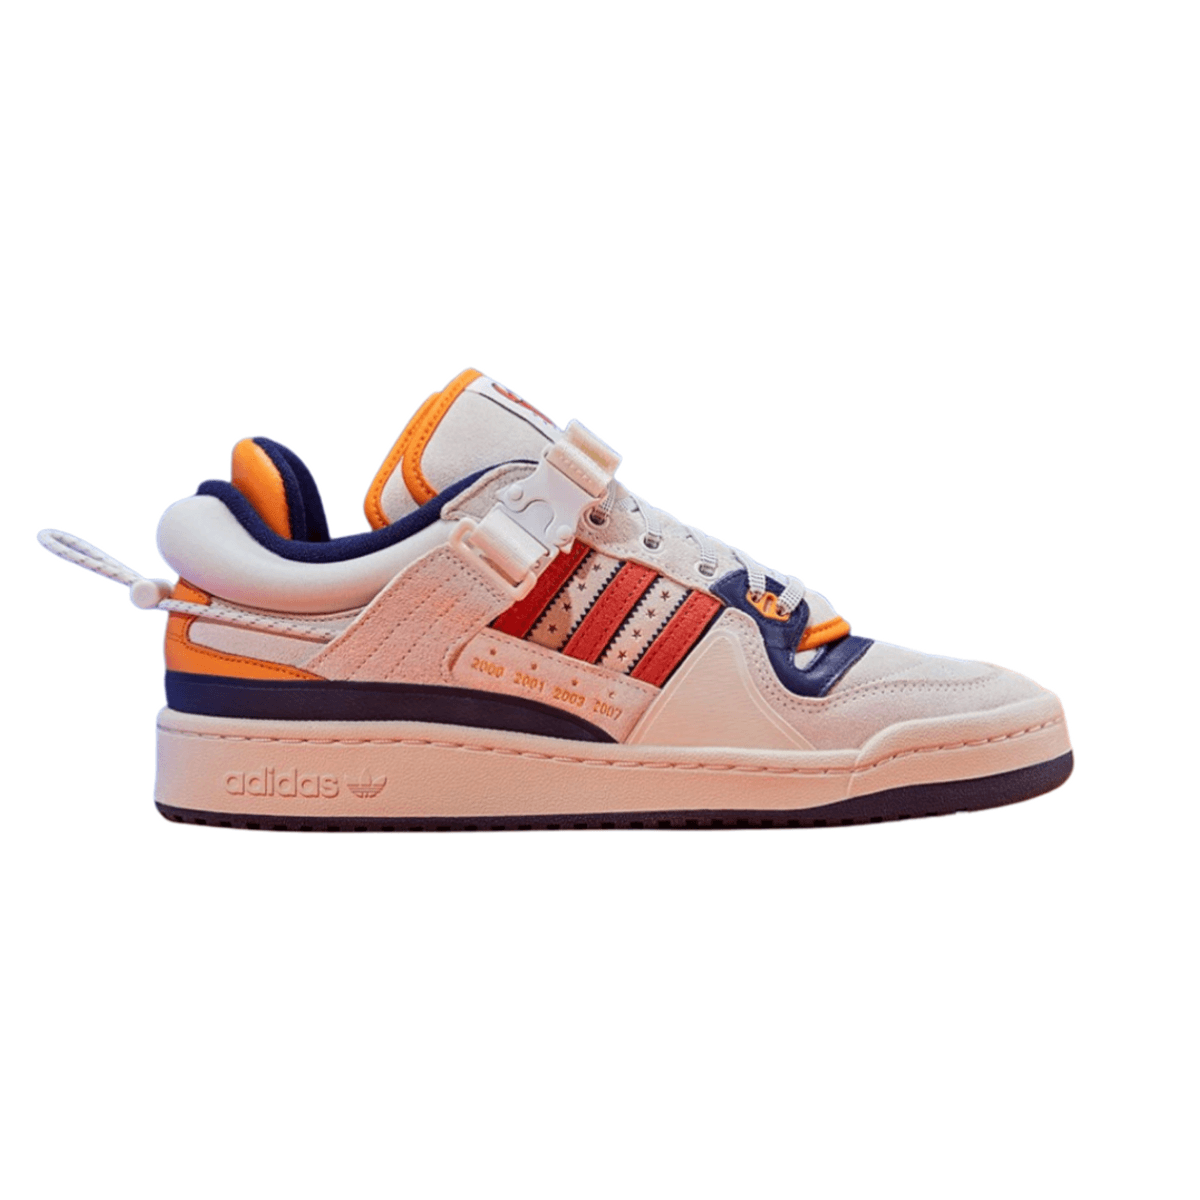 The Bad Bunny x Adidas Forum Low Cangrejeros Pays Homage To His Puerto Rican Basketball Team